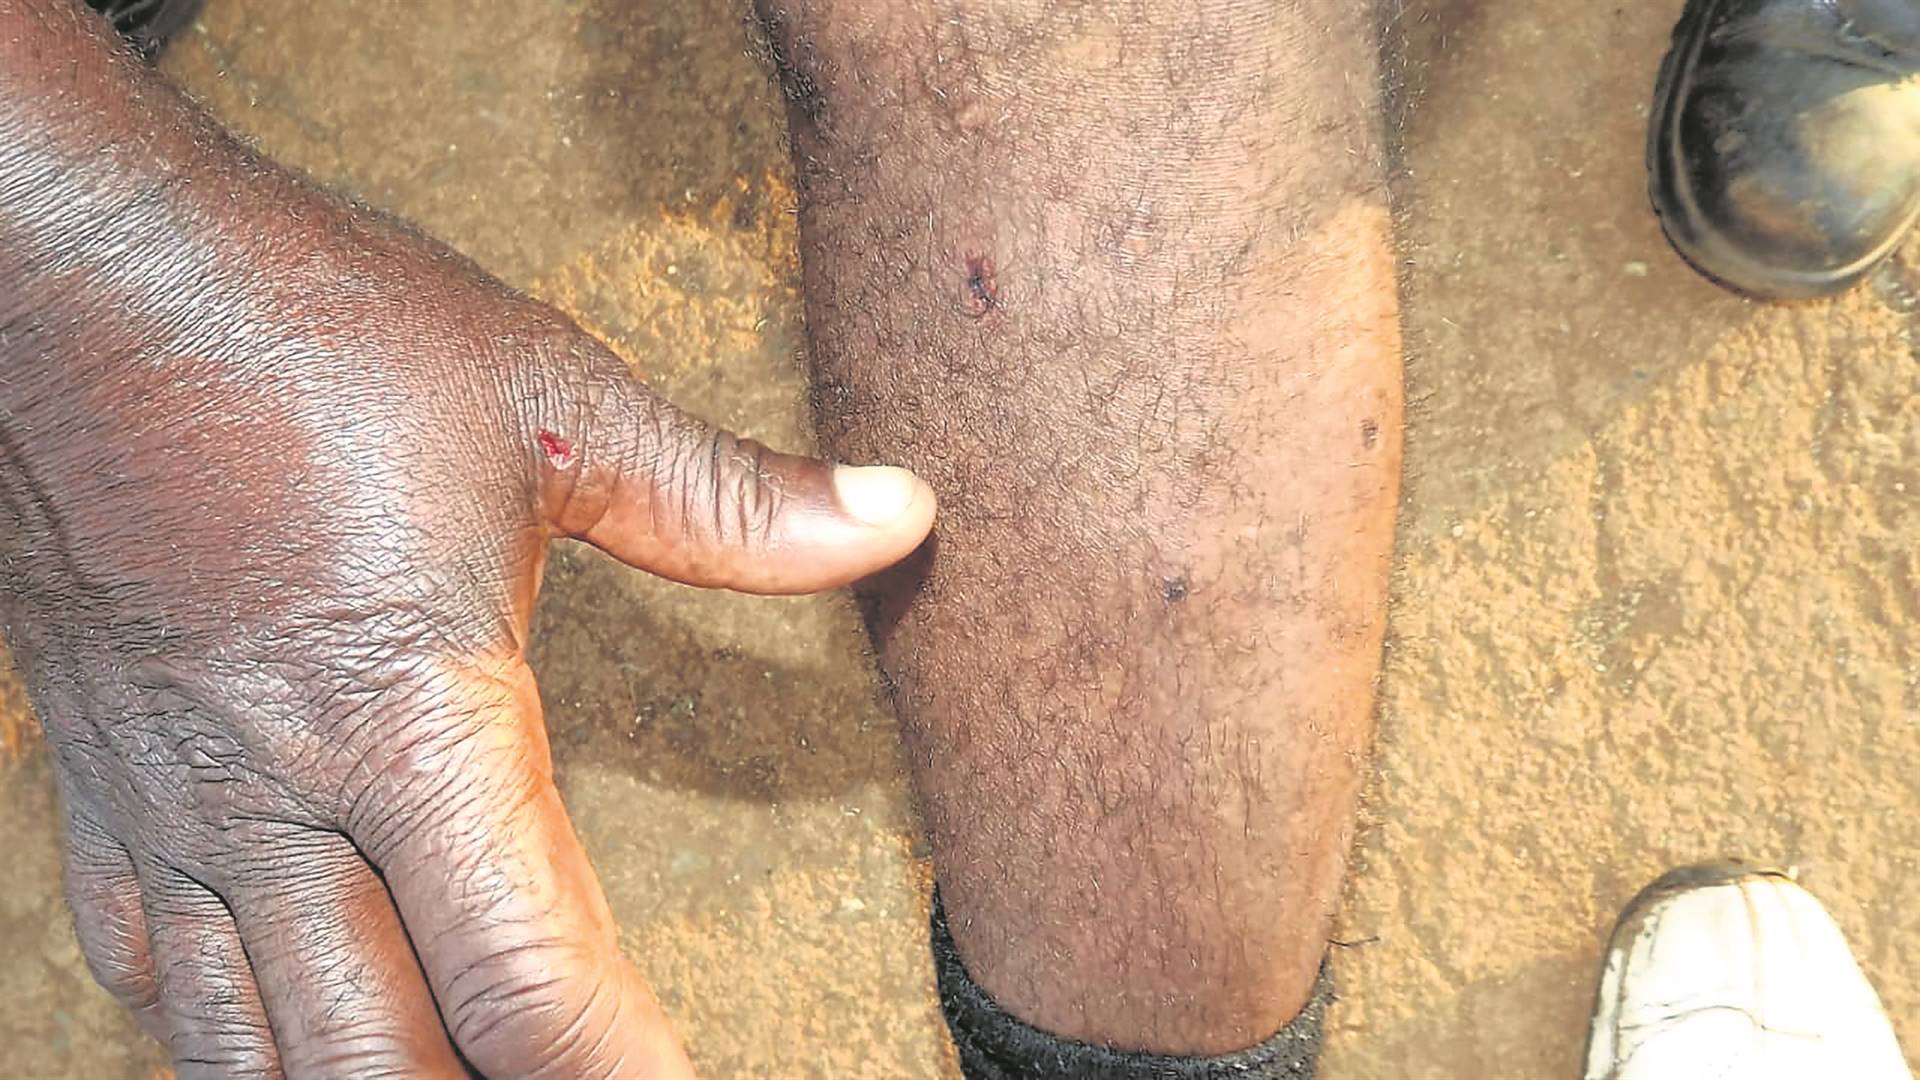 William Ndlazi shows where he was stabbed with a screwdriver on one of his legs. Photo by Sammy Moretsi